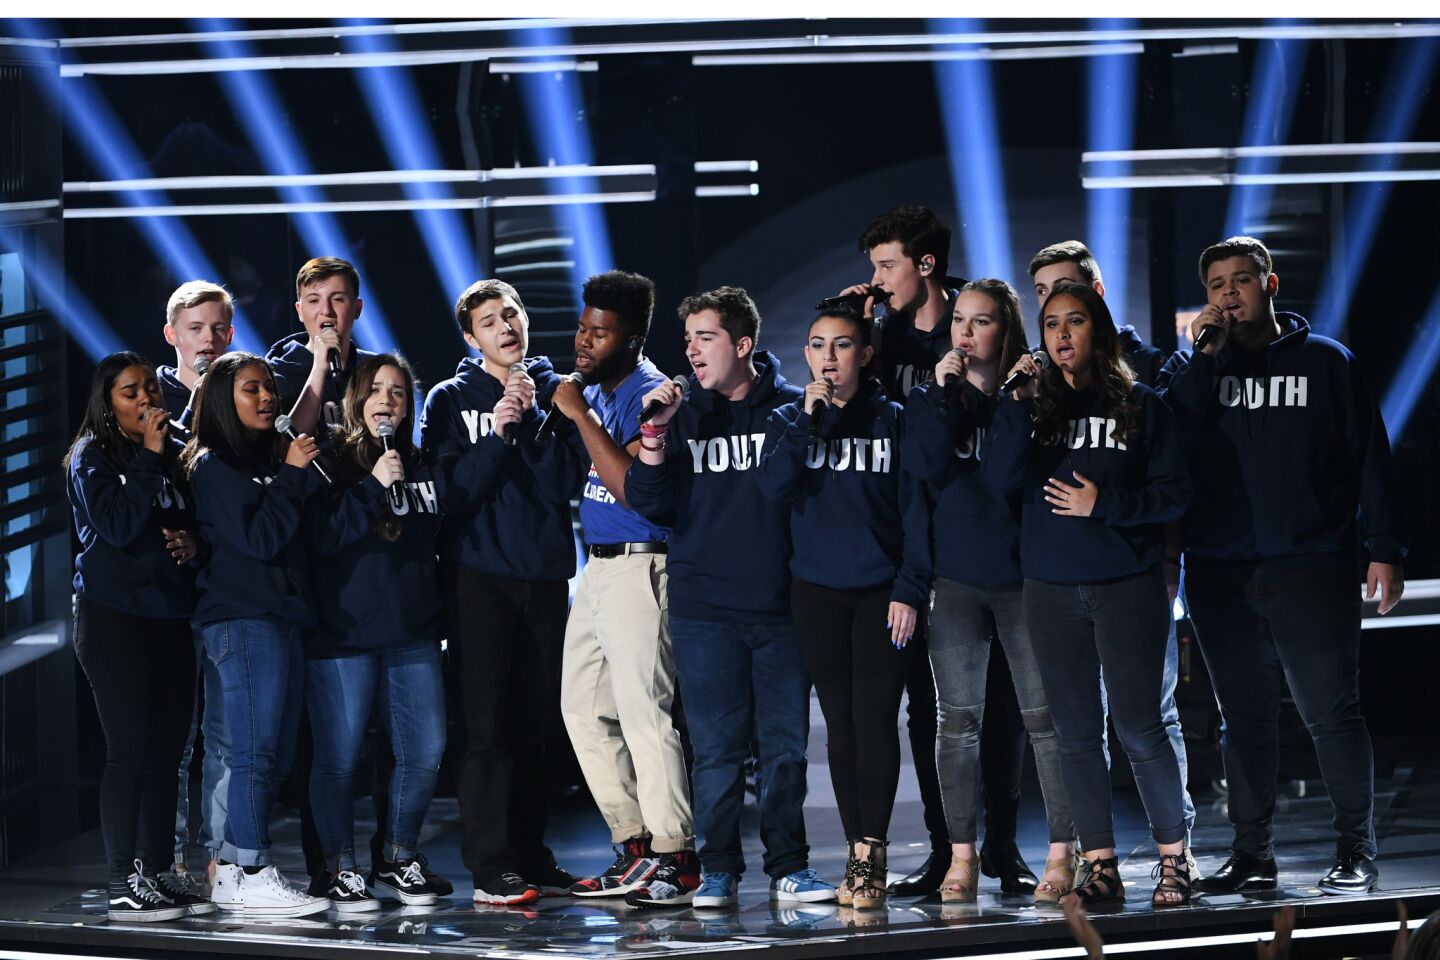 Members of the choir from Marjory Stoneman Douglas High School in Parkland, Fla., join Khalid and Shawn Mendes for the end of "Youth" as a plea to end gun violence. Fourteen people were shot to death at the Florida high school in February, and two days before the Billboard awards, 10 were killed in a Texas high school shooting.